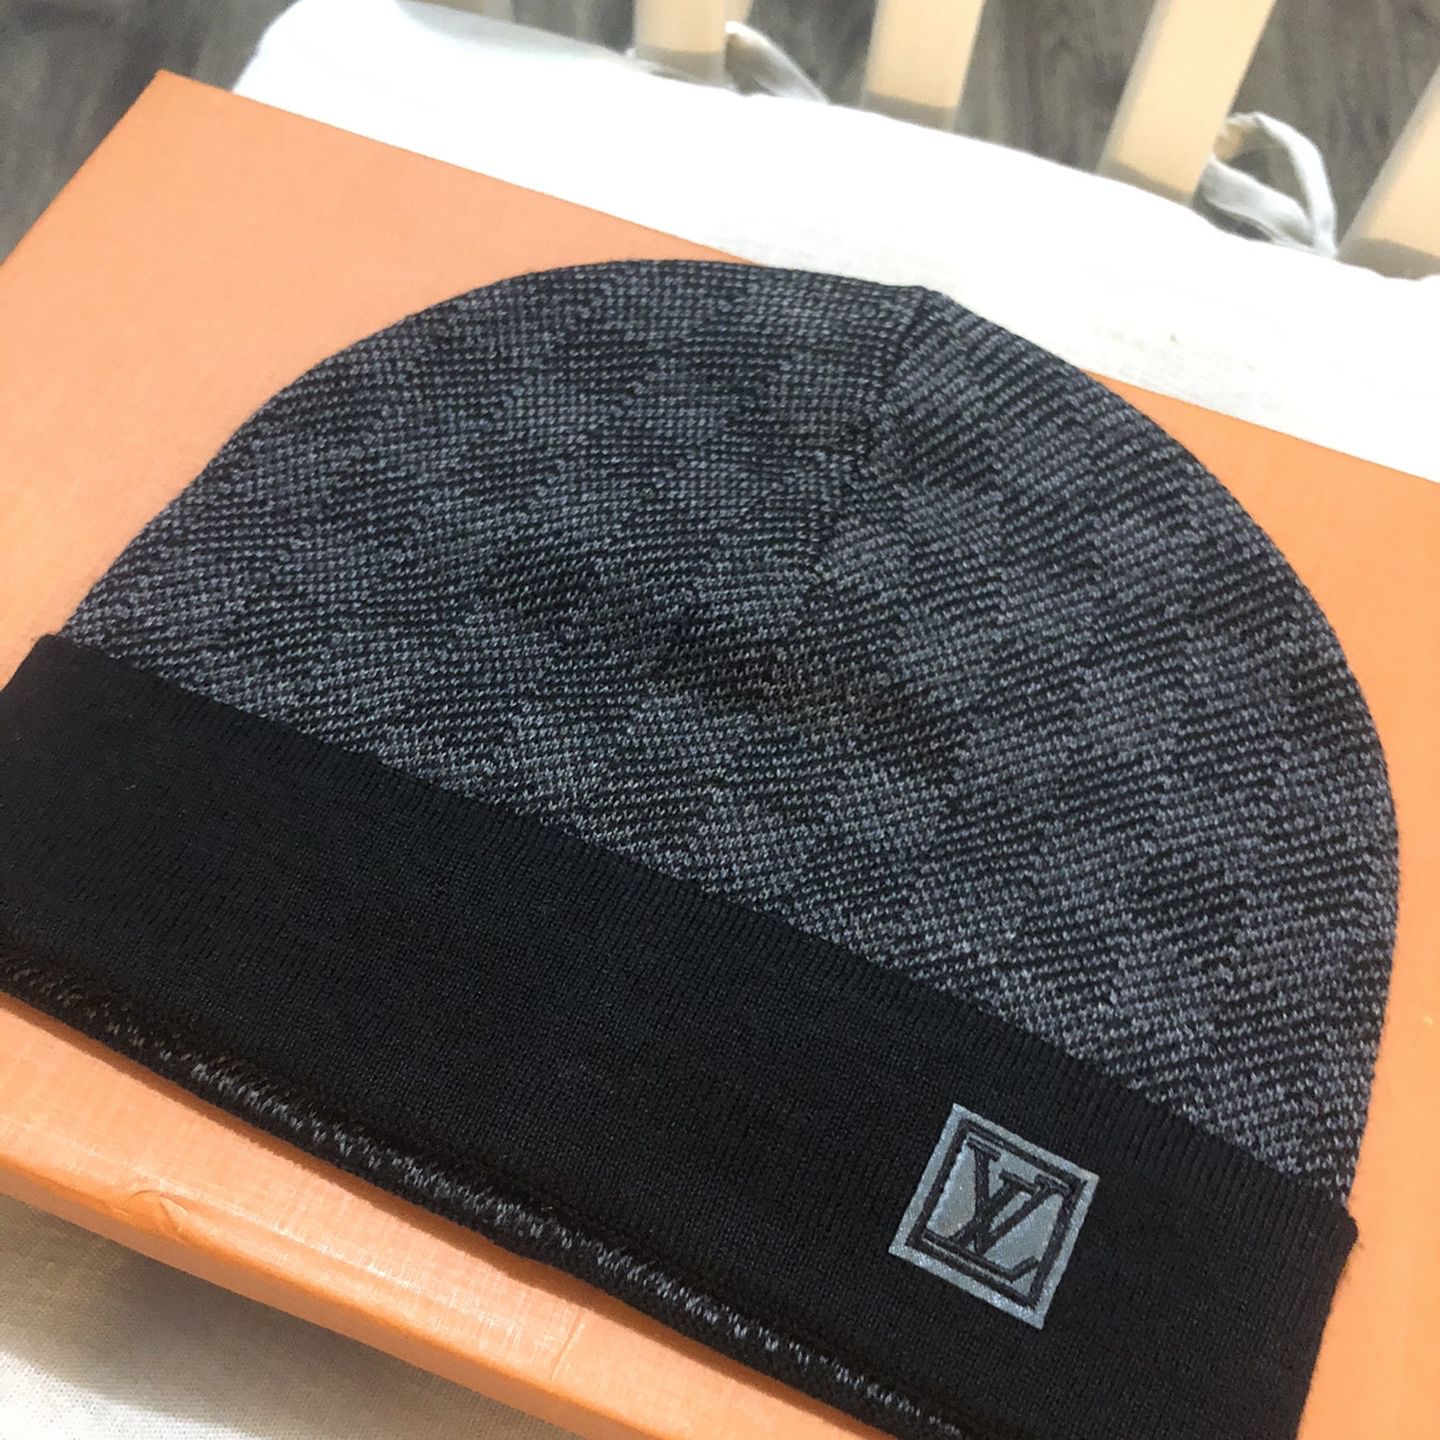 Louis Vuitton Used Hat for Sale in Nanuet, NY - OfferUp